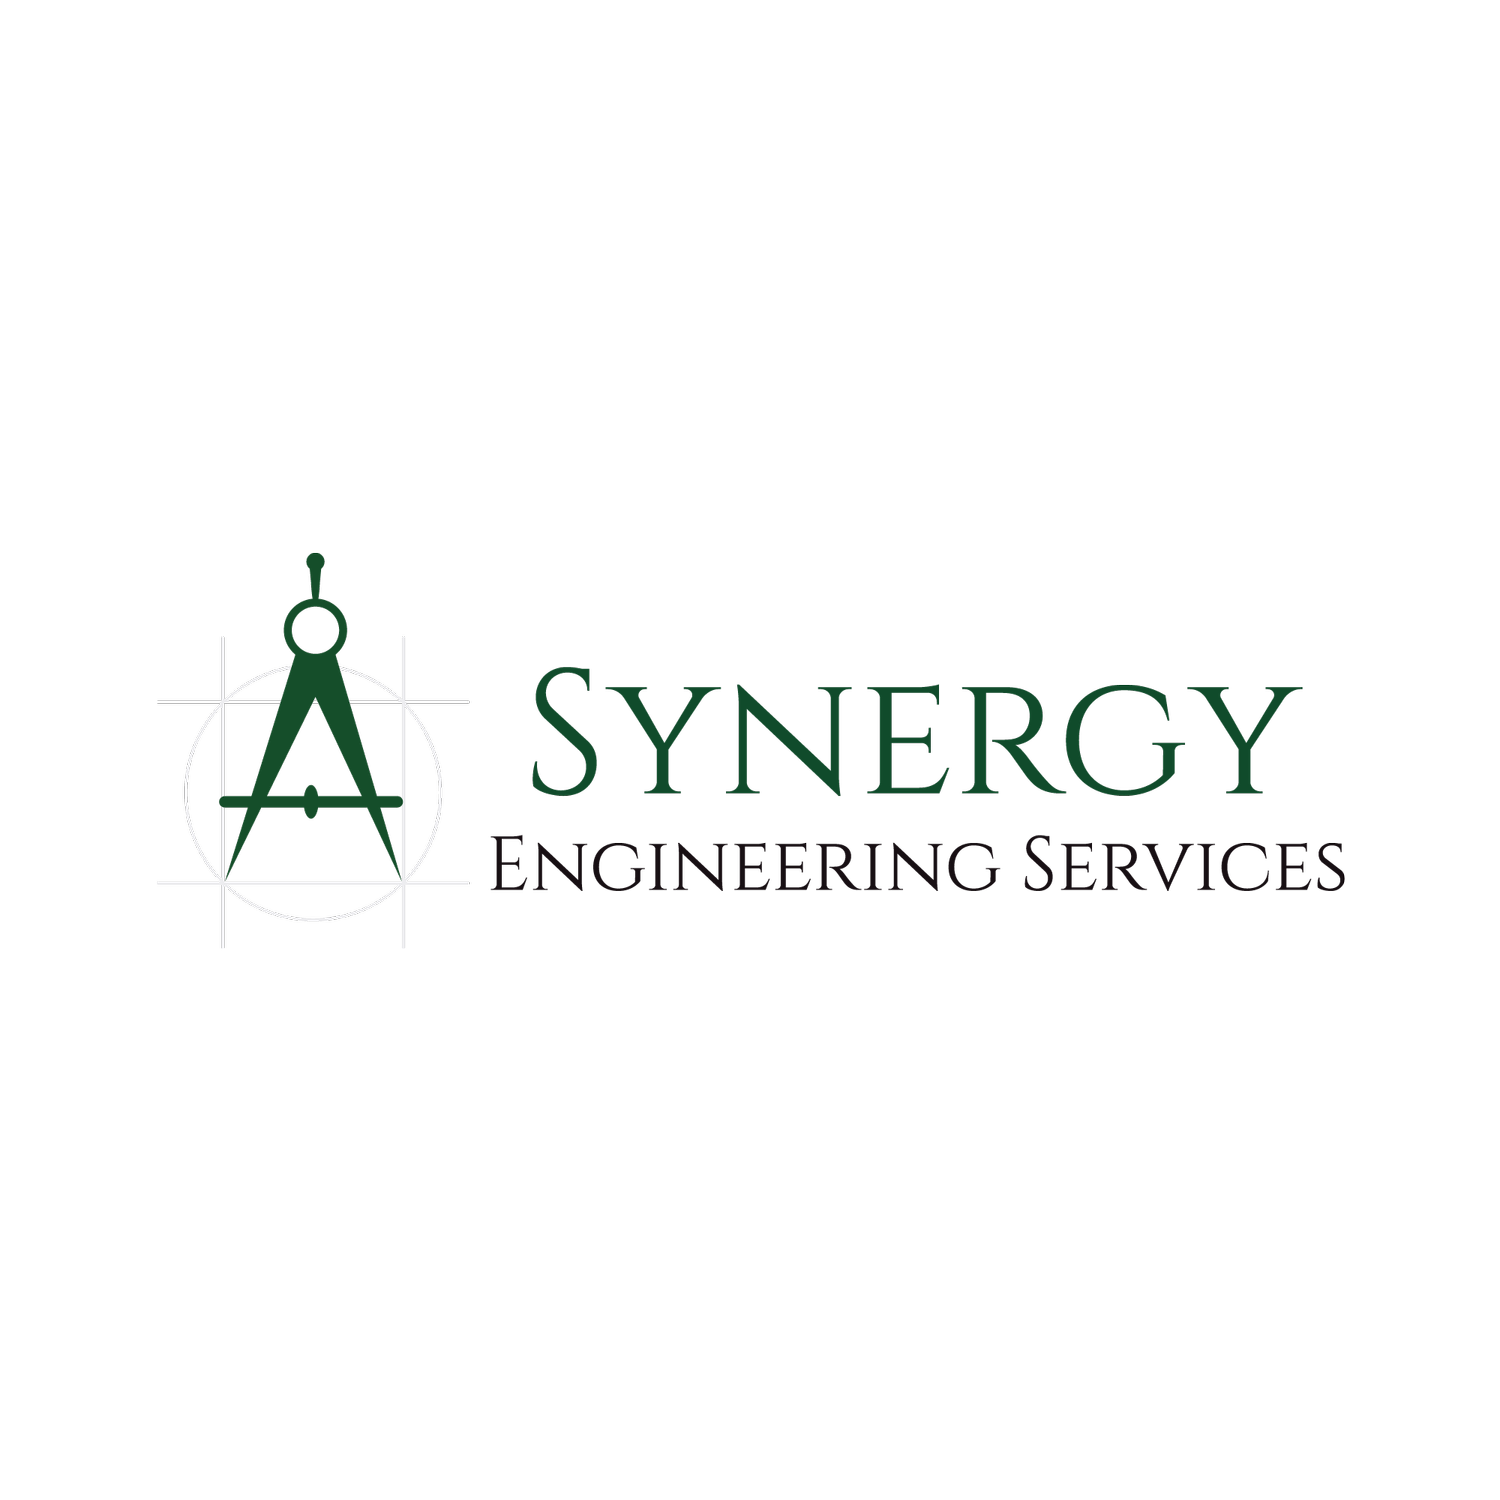 Synergy Engineering Services